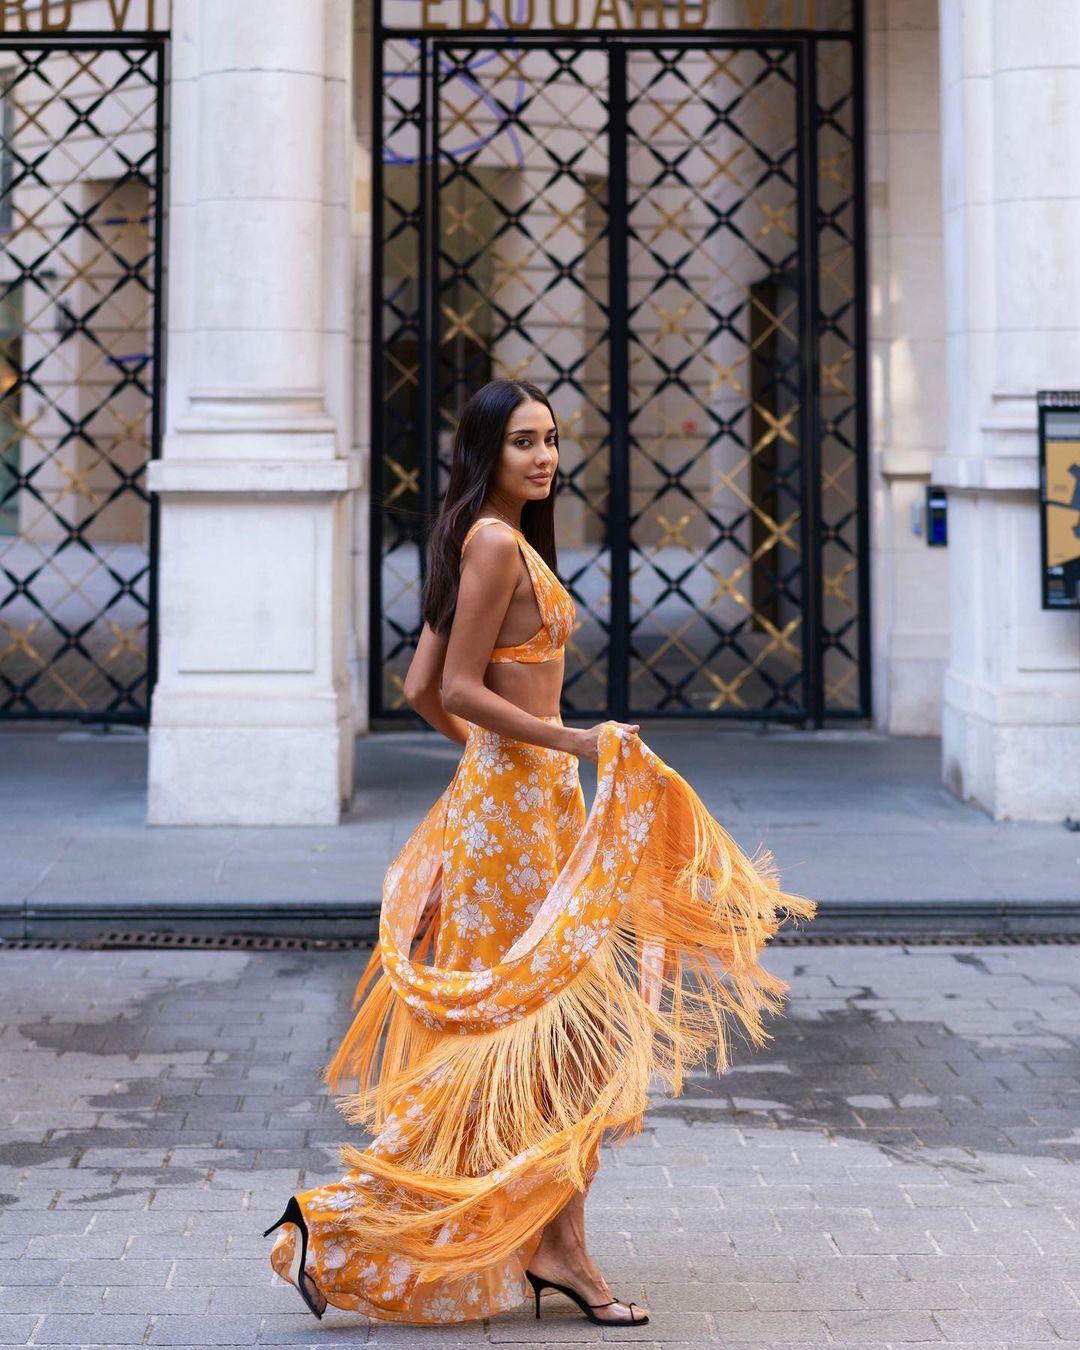 Lisa Haydon embraces summer vibes in a vibrant orange co-ord skirt set with delicate white flower prints.